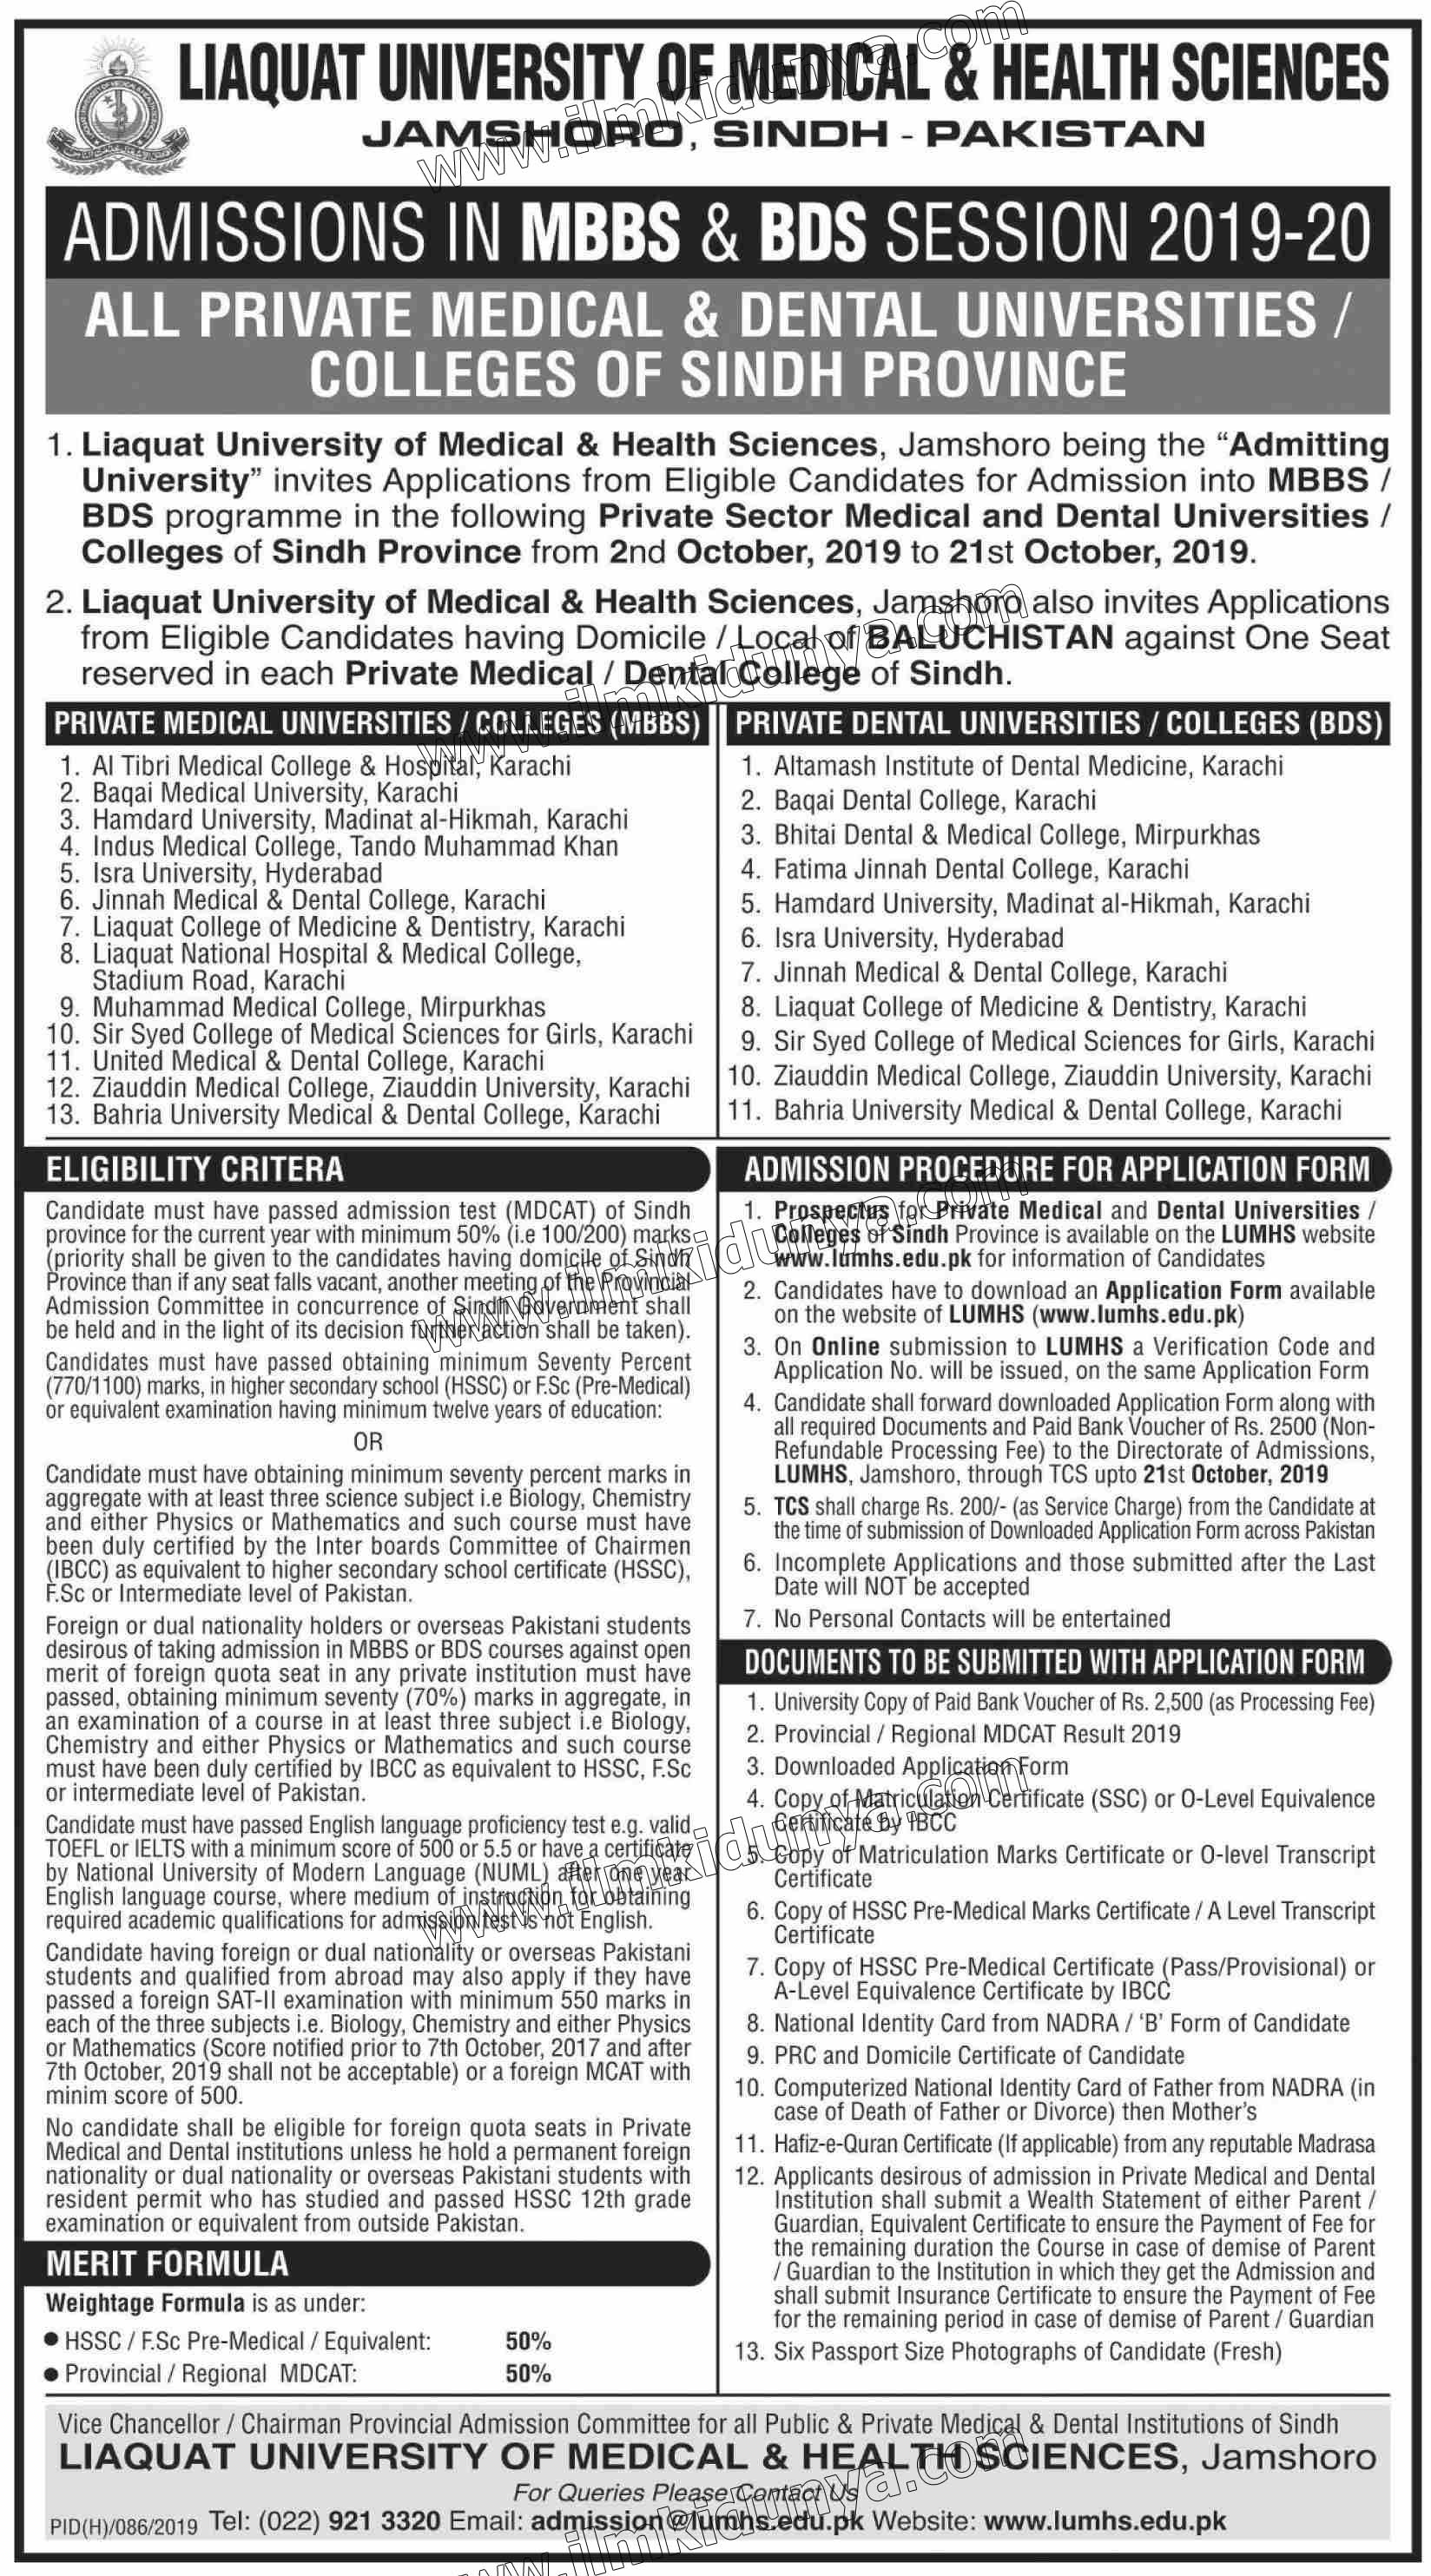 This admission notice is announced by Liaquat College of Medicine & Den...